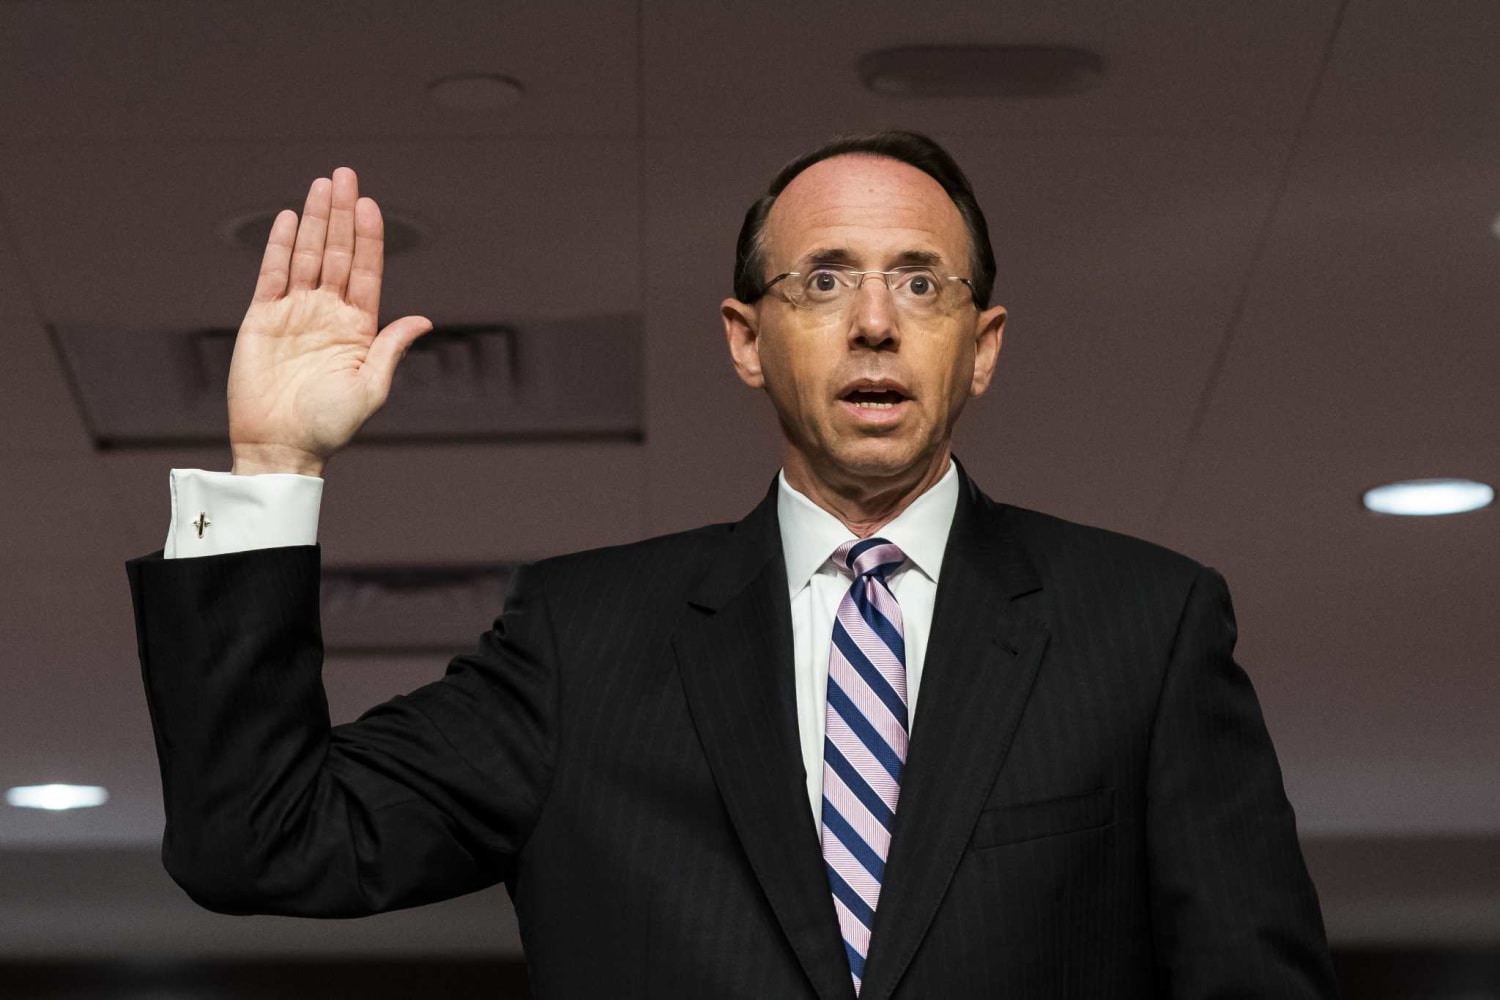 Rosenstein says he regrets approving surveillance of Trump campaign adviser